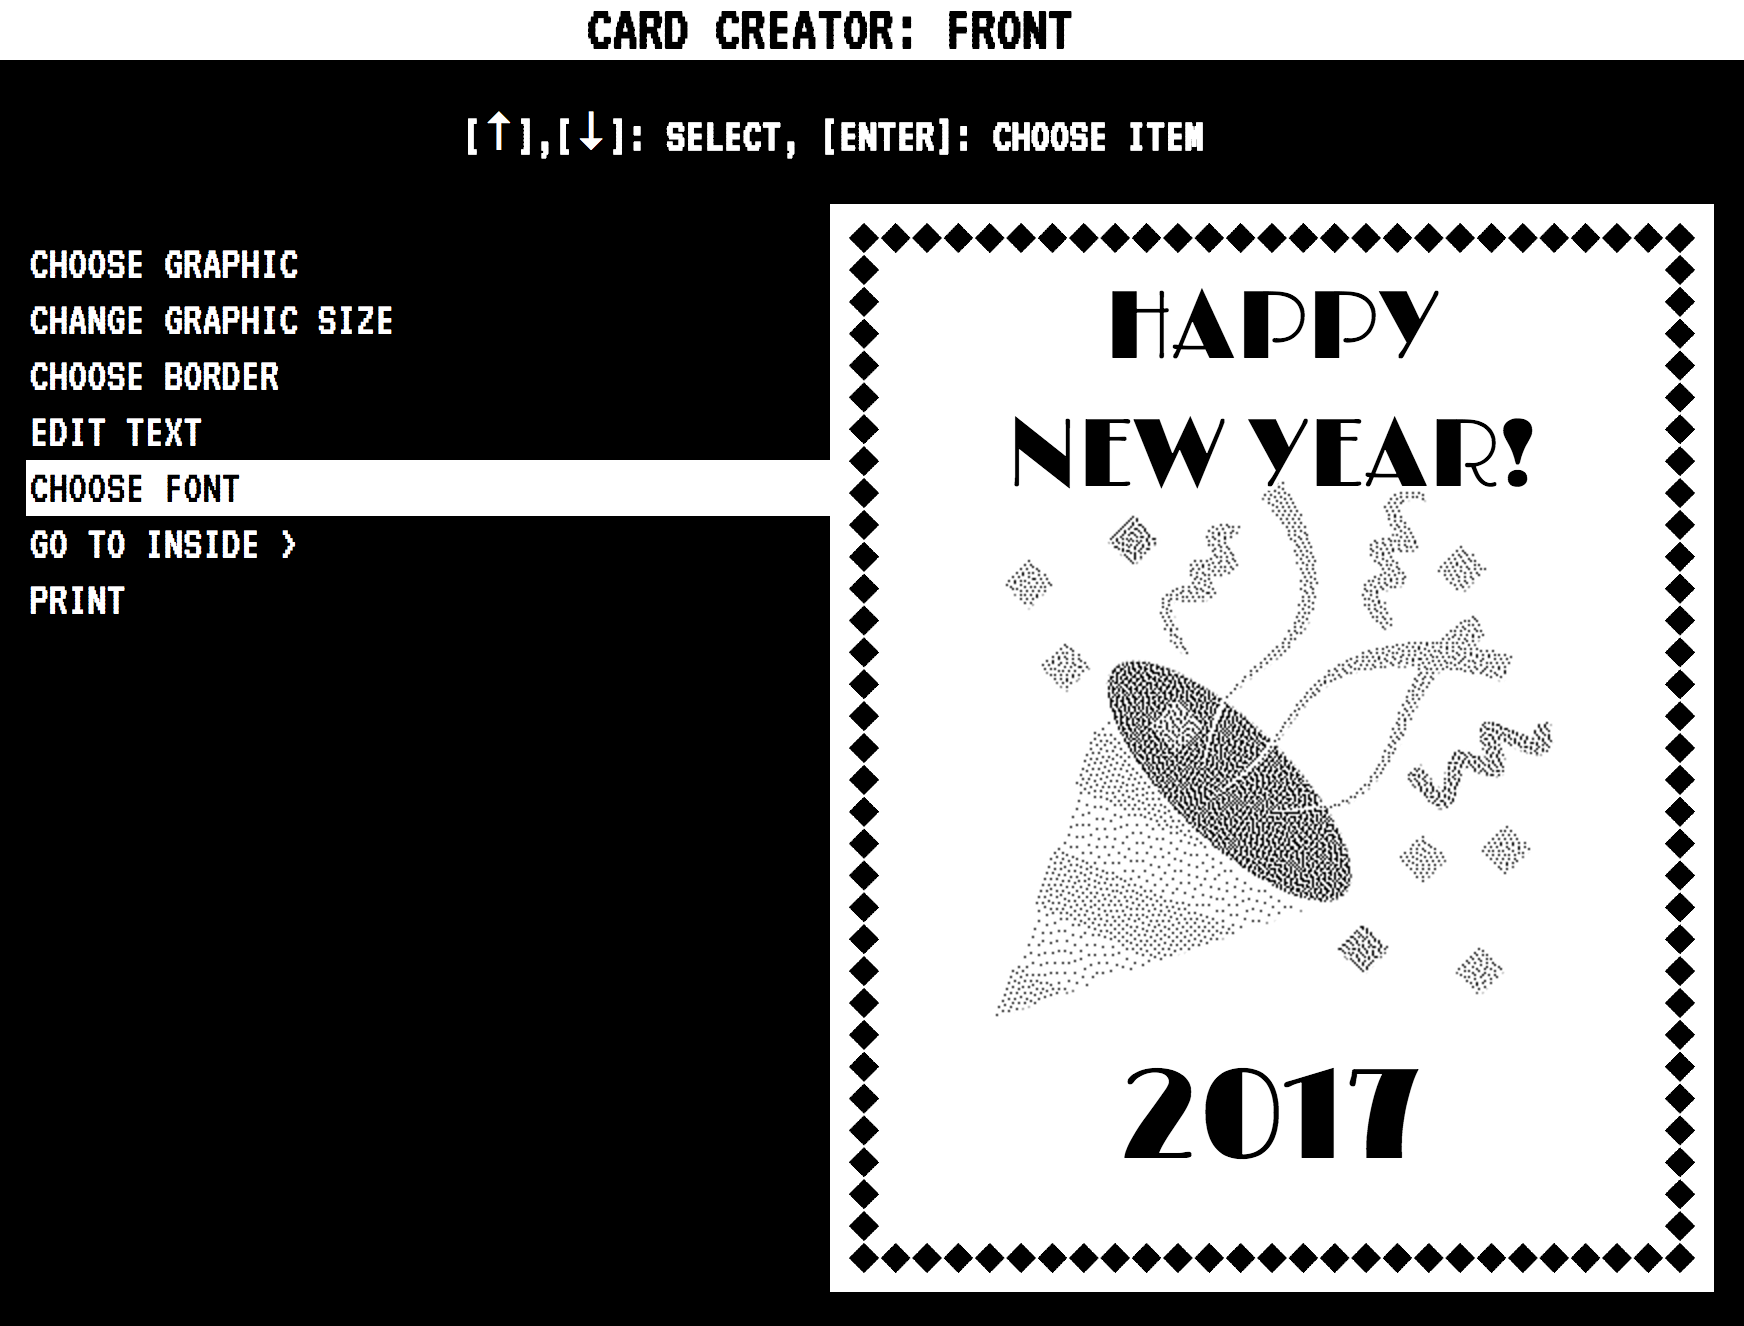 Making a new years card